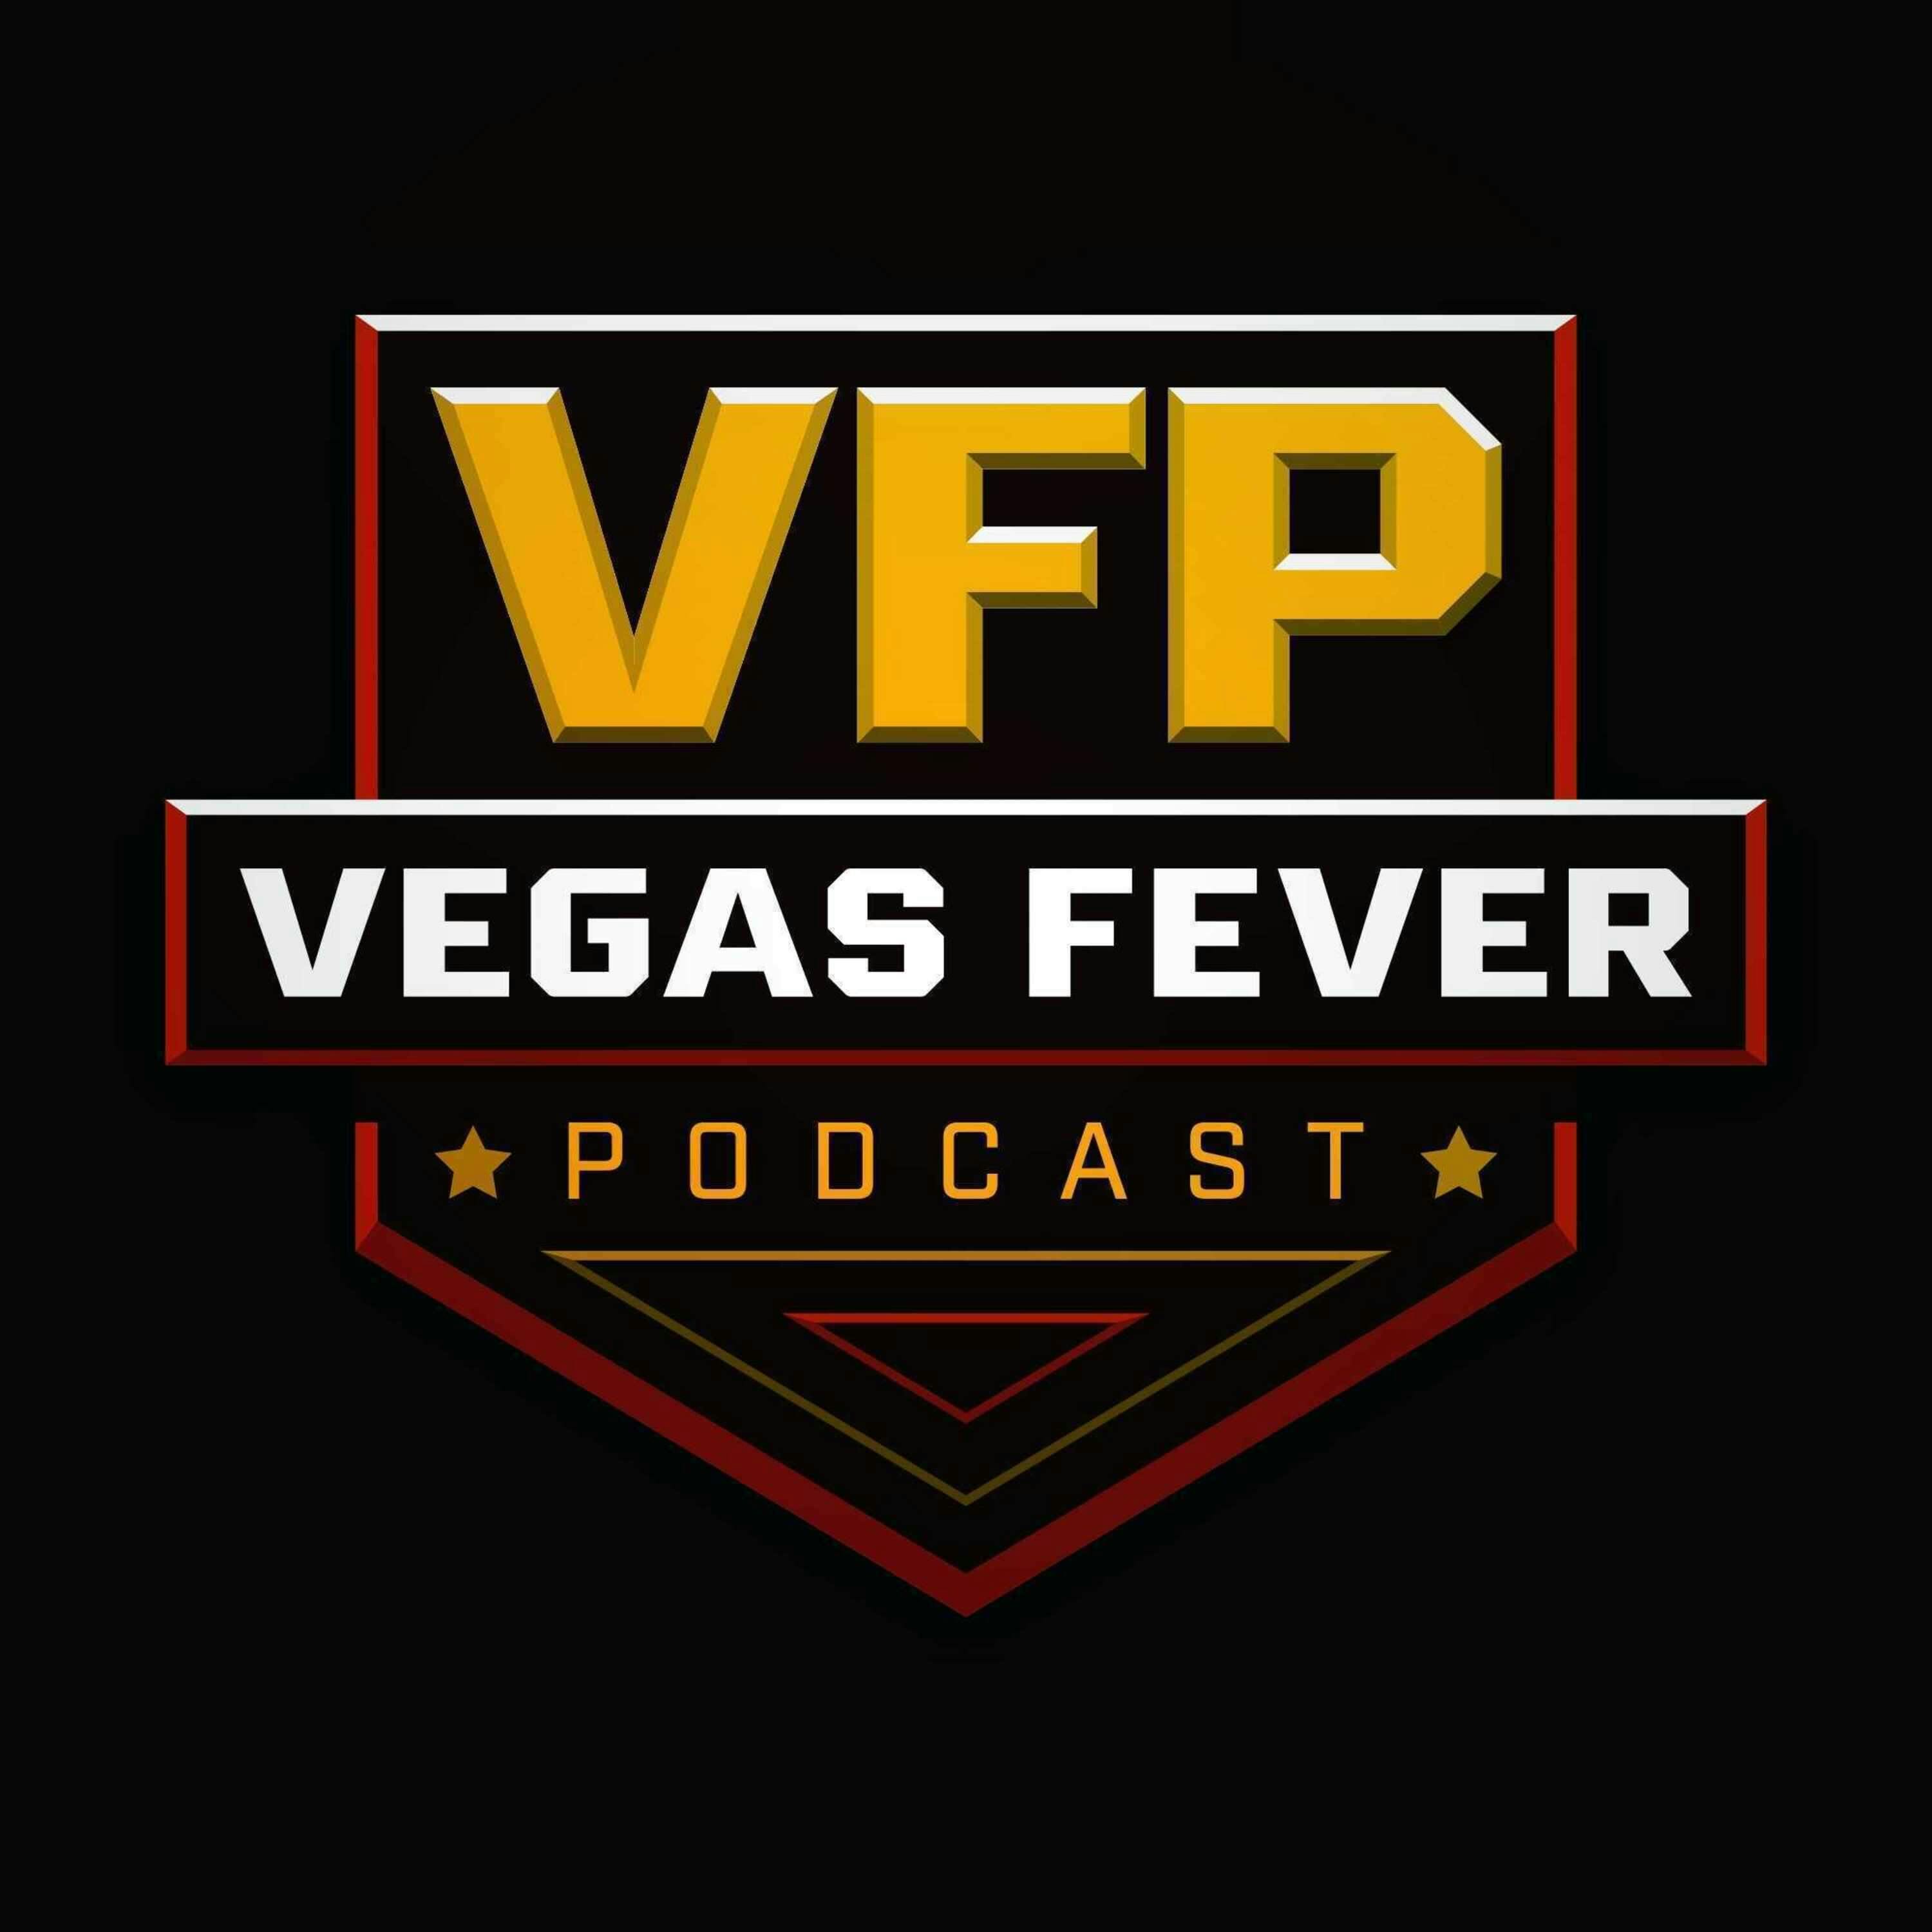 Episodes 19 - UNLV loses a big commitment,the VGK clinch a playoff spot as they continue to impress.